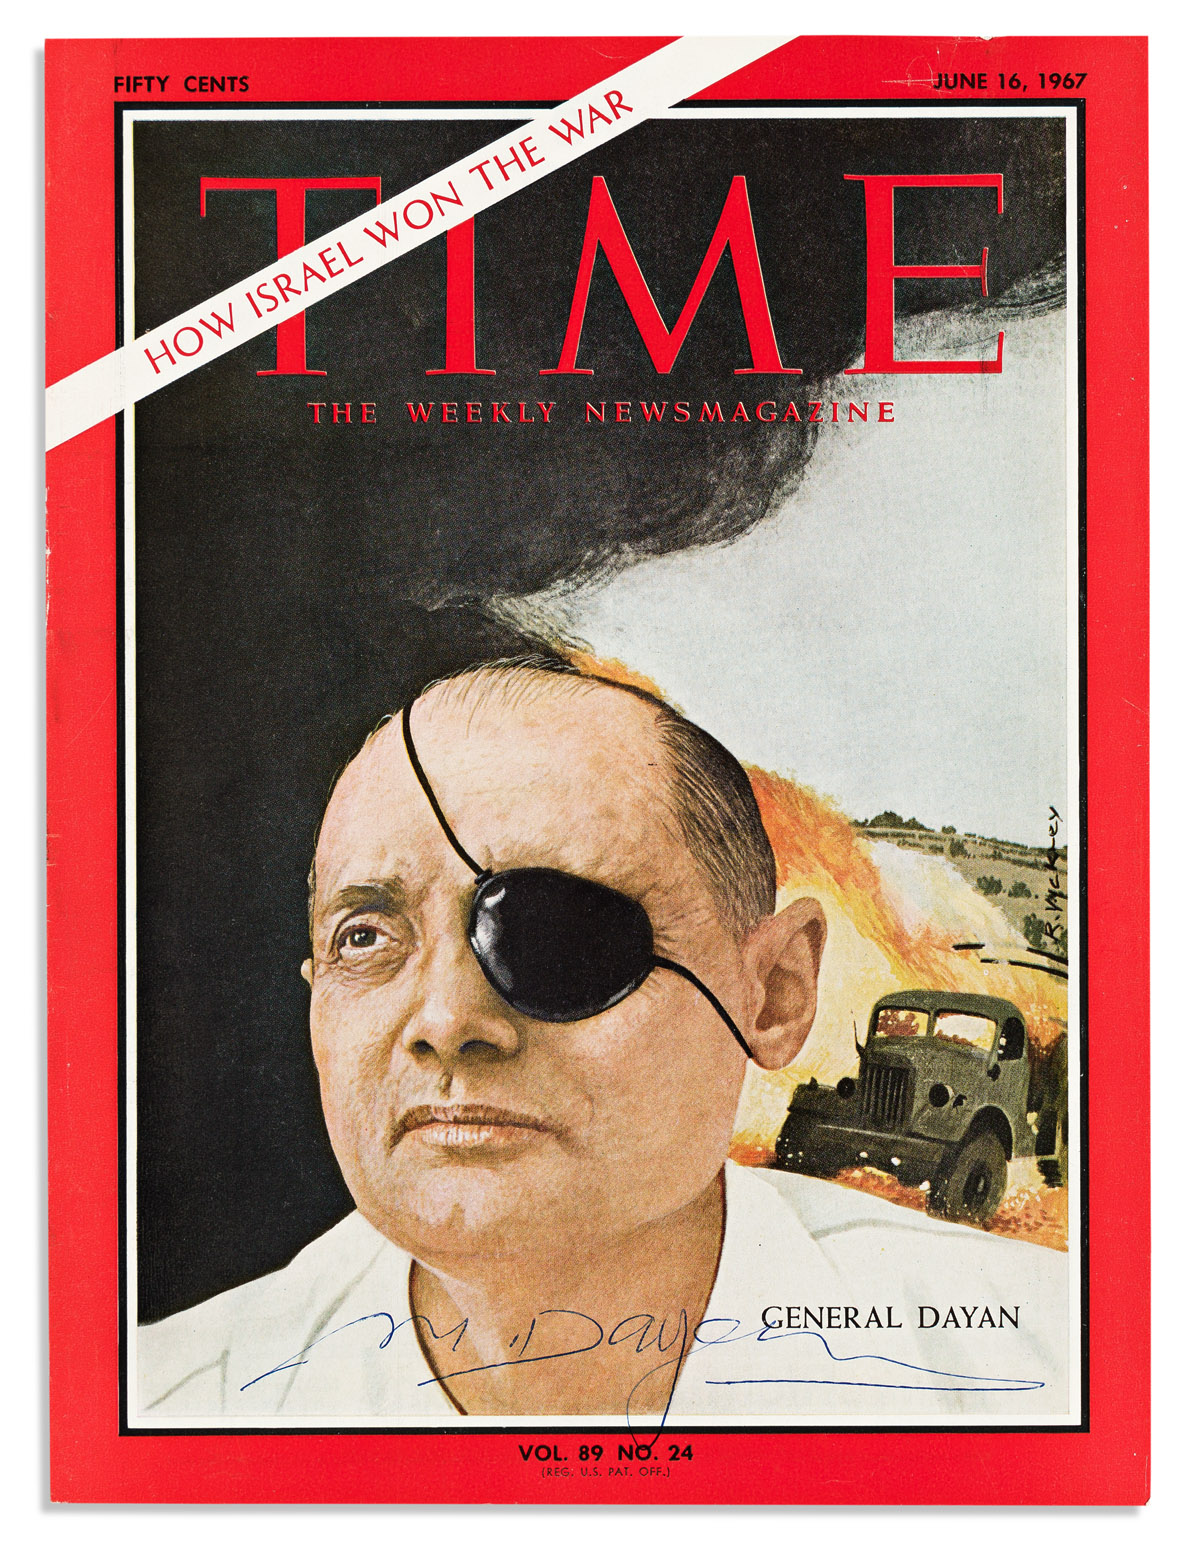 (WORLD LEADERS.) Group of 4 Time magazine covers, each Signed: Moshe Dayan * Edward Kennedy (2) * Anwar Sadat.